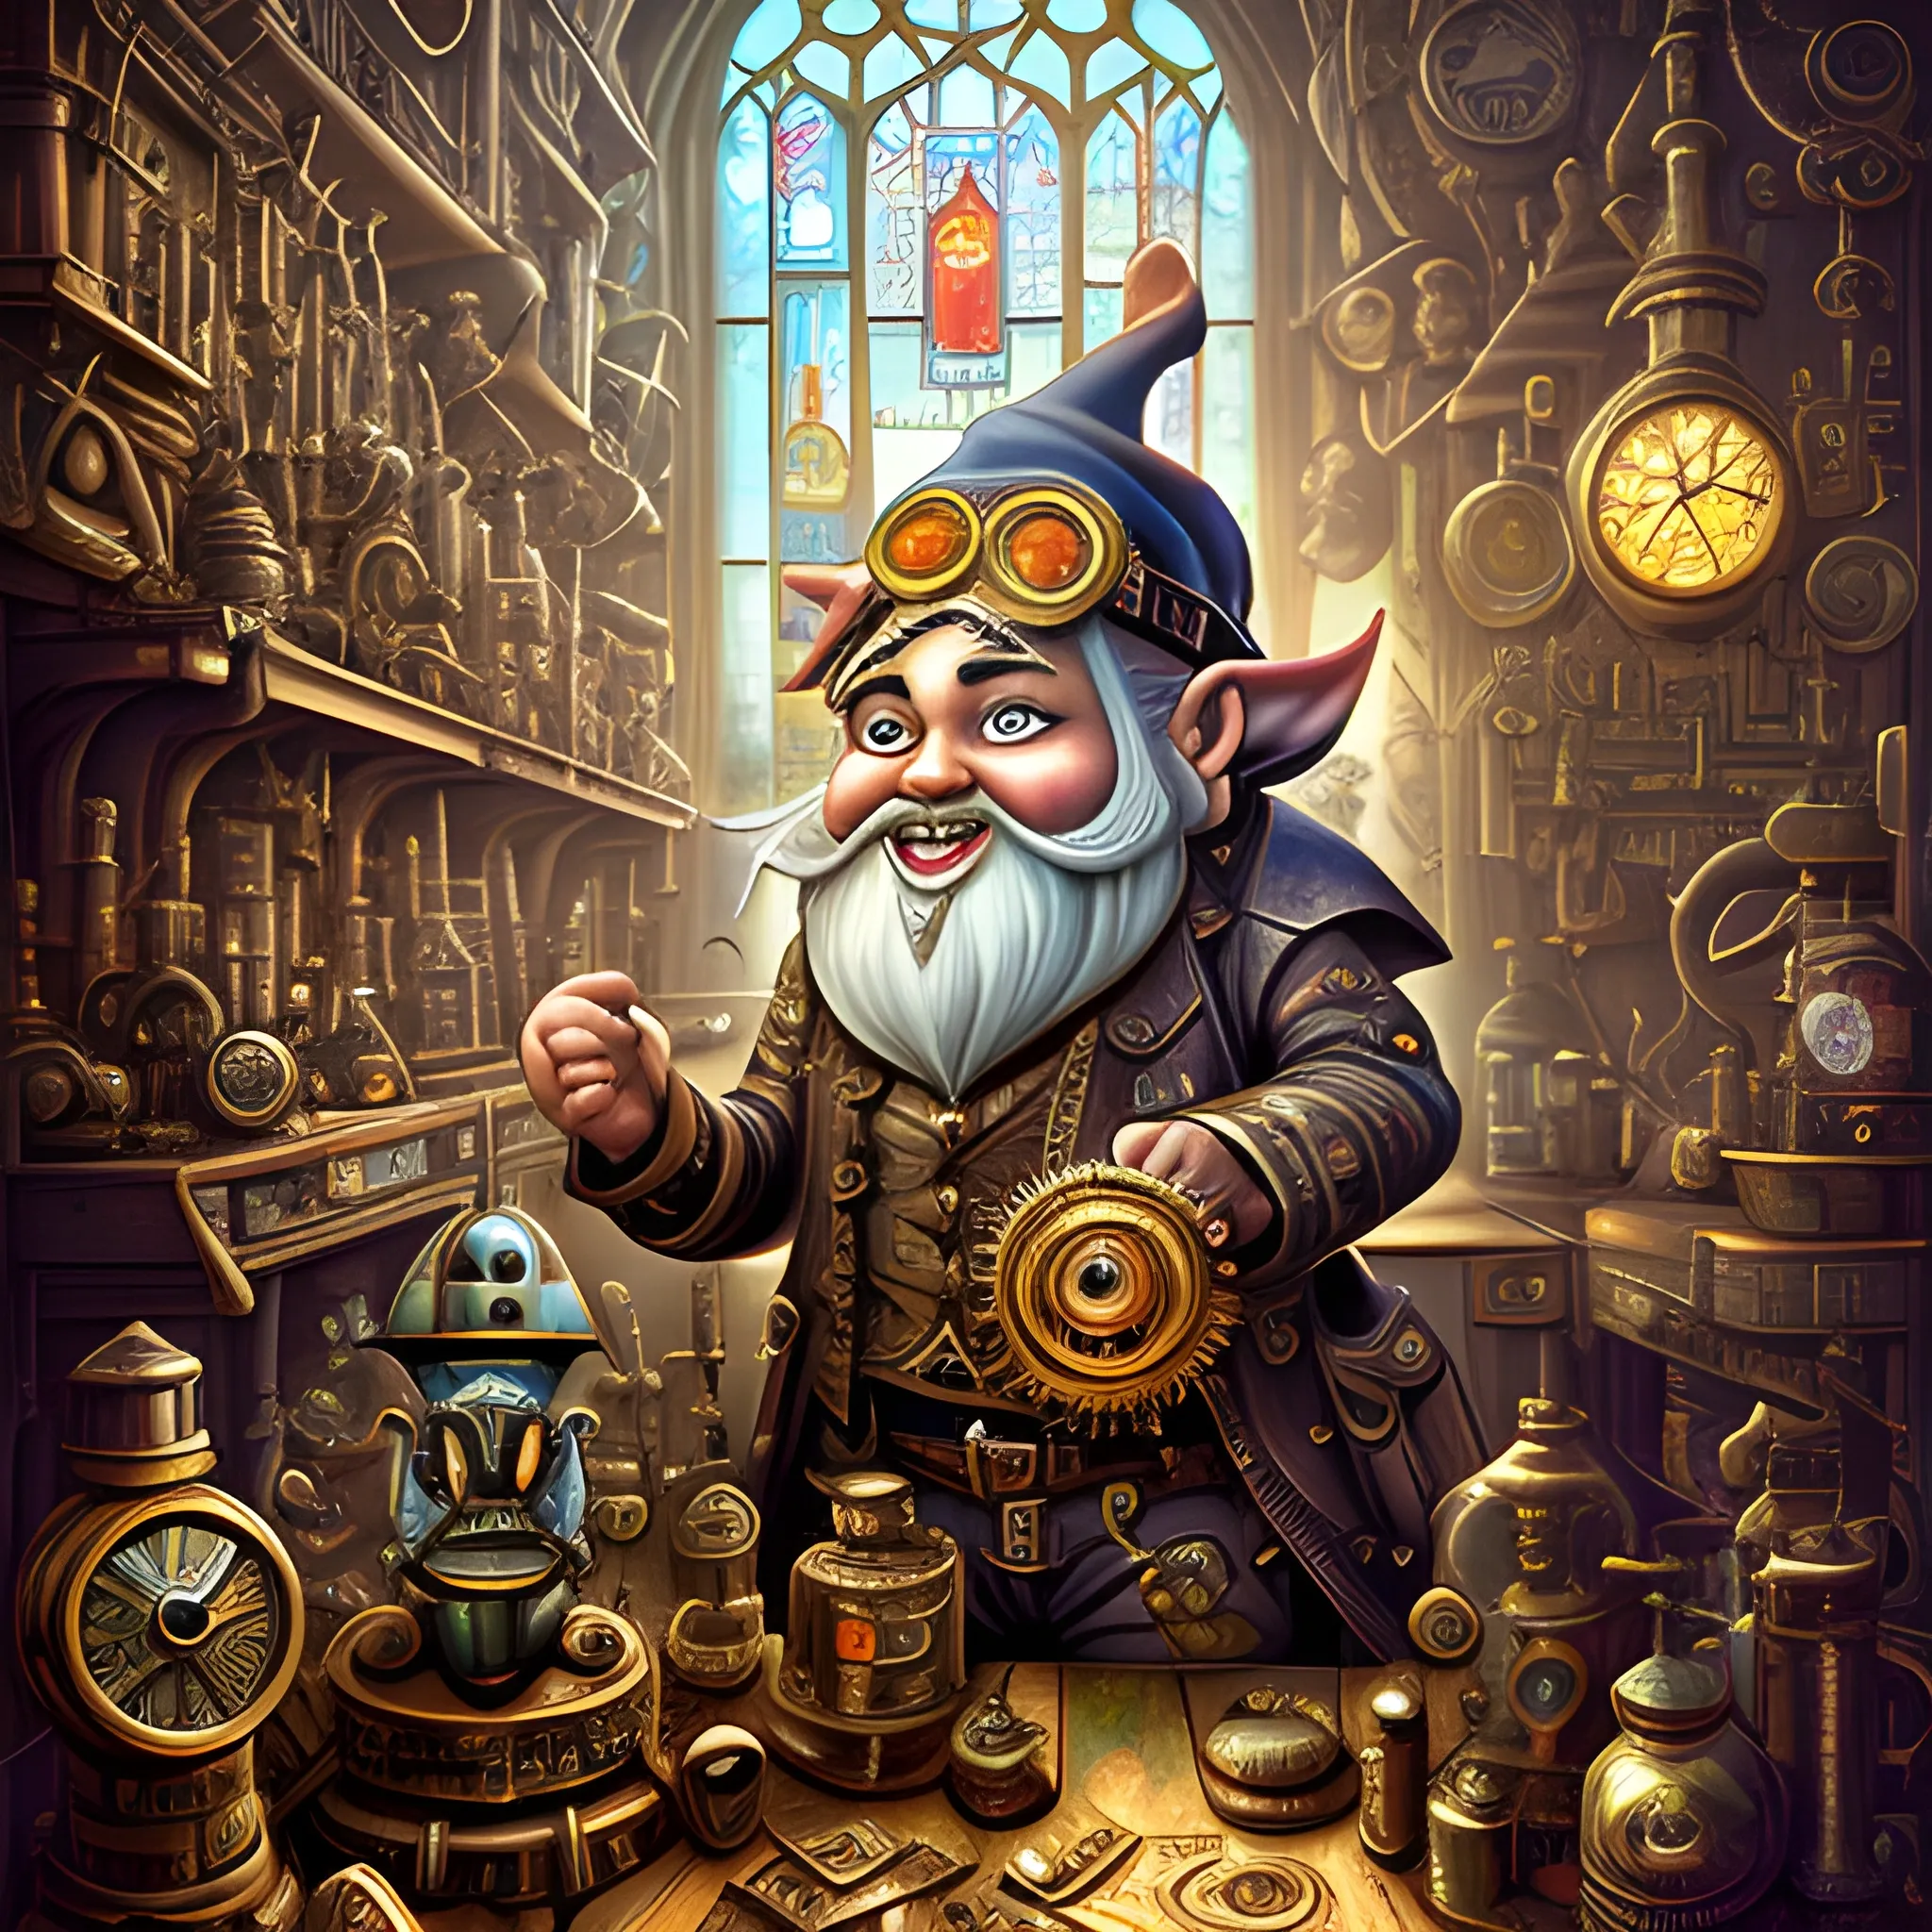 A steampunk-inspired digital illustration of a gnome inventor in a cluttered workshop, surrounded by intricate machinery and gears. The camera angle is a medium shot, capturing the gnome's enthusiastic expression as he tinkers with a fantastical contraption. The lighting is warm and atmospheric, with rays of sunlight streaming through stained glass windows, casting vibrant colors and ((shadows)) across the room. The style combines elements of steampunk and clock-punk, resembling the works of Jules Verne and H.R. Giger. The image is detailed and intricate, showcasing the gnome's ingenious inventions and the mesmerizing complexity of the steampunk world. It is a visually stunning artwork that captures the imagination., Oil Painting, Cartoon, Trippy